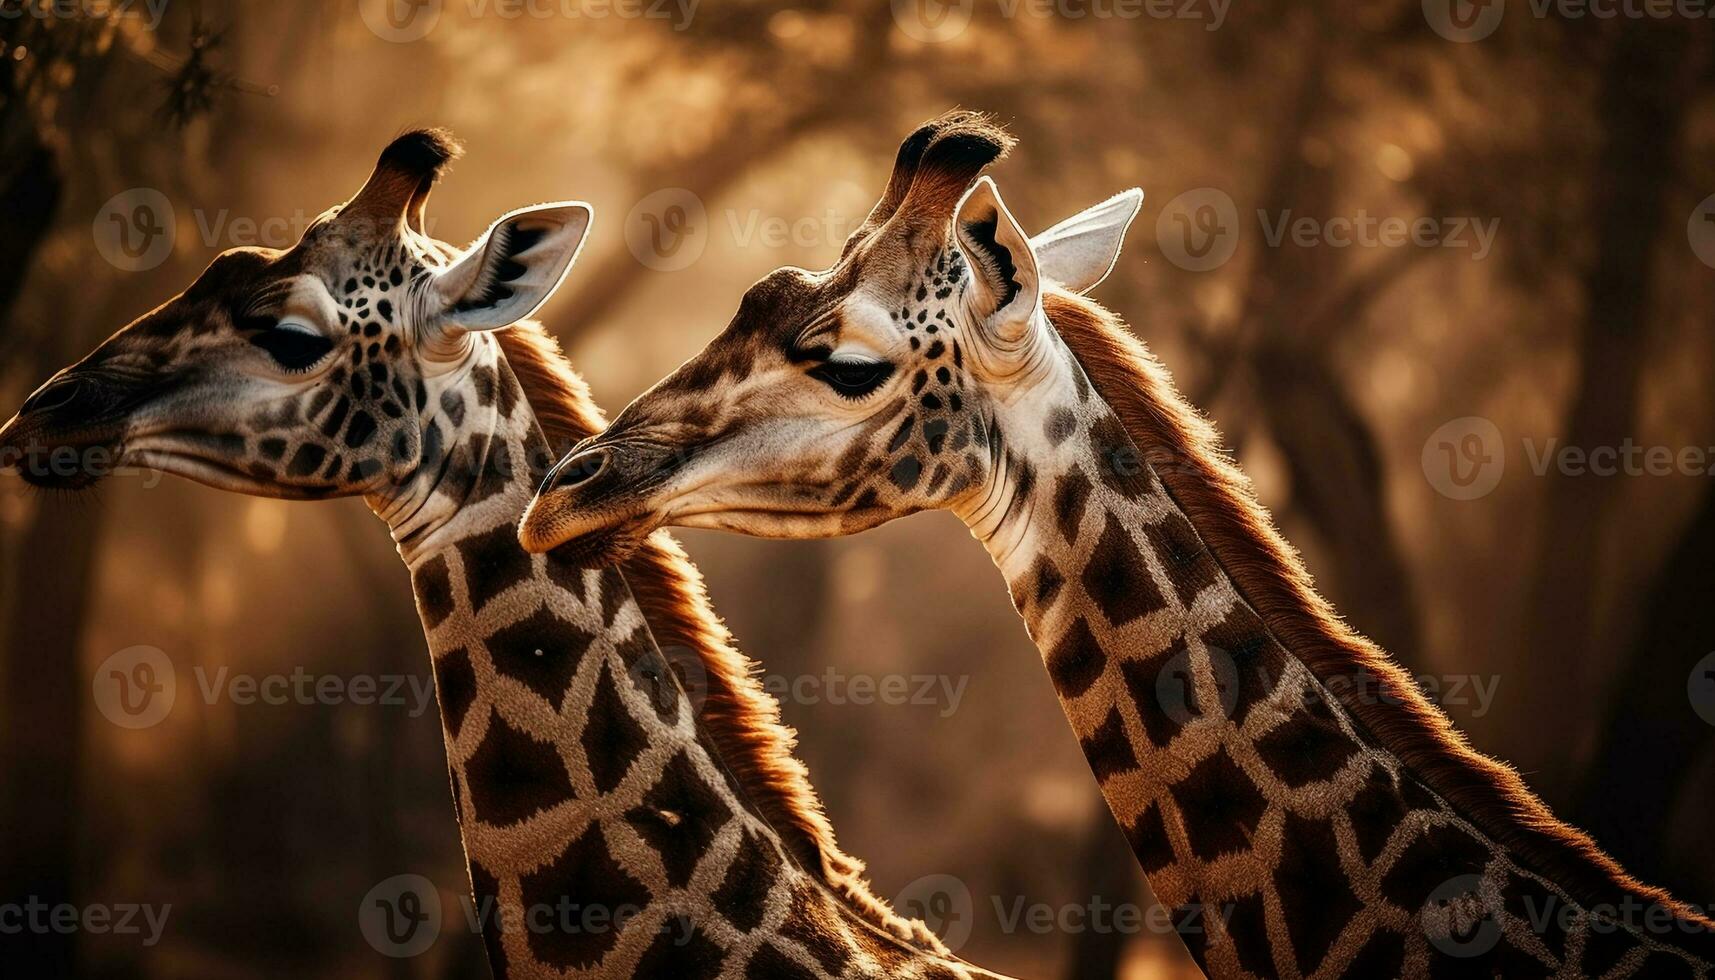 Giraffe calf kissing, standing in sunlight eating generated by AI photo